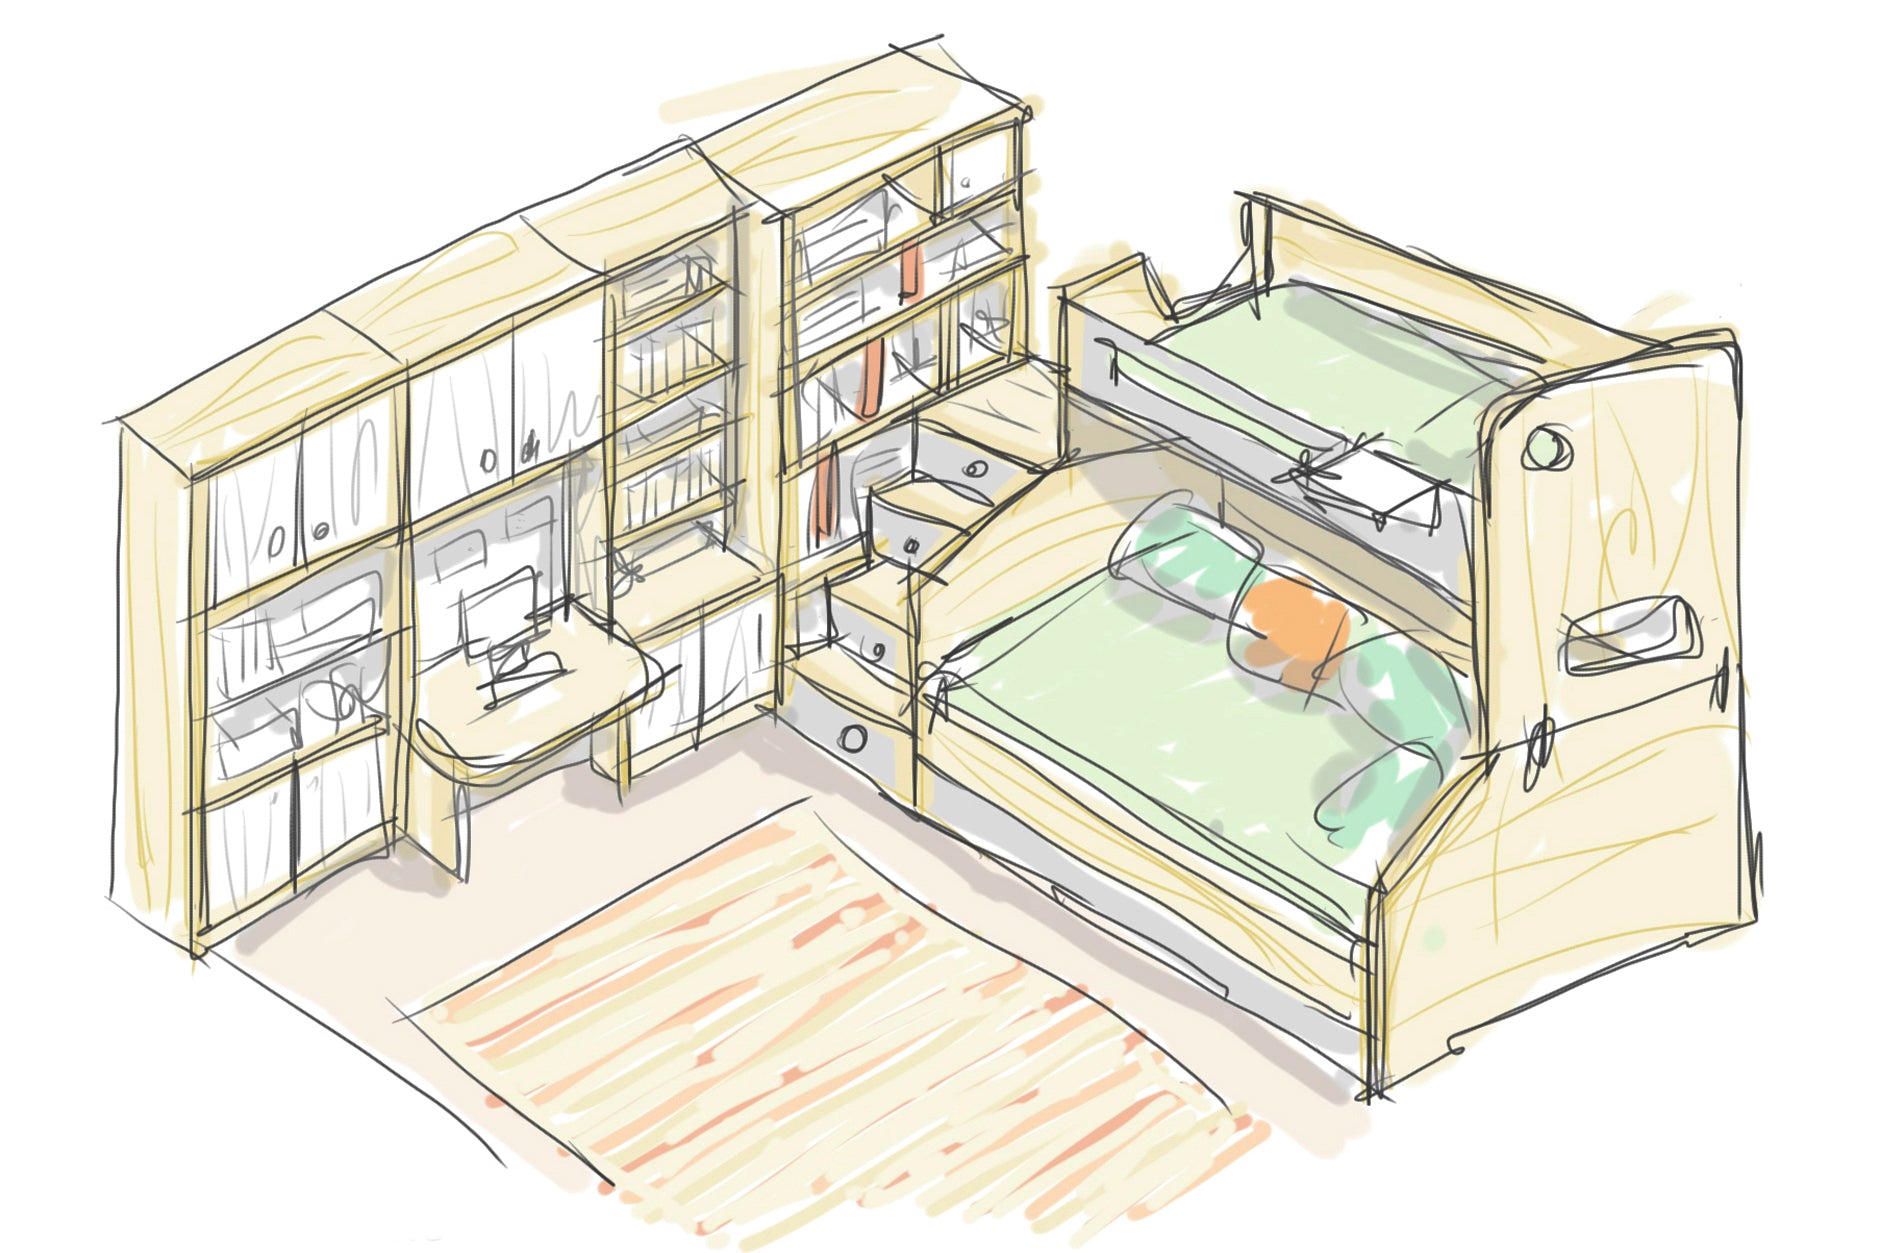 Sketch of a child's bedroom setup with a bed, integrated desk, extensive bookshelves, and a cozy area rug.